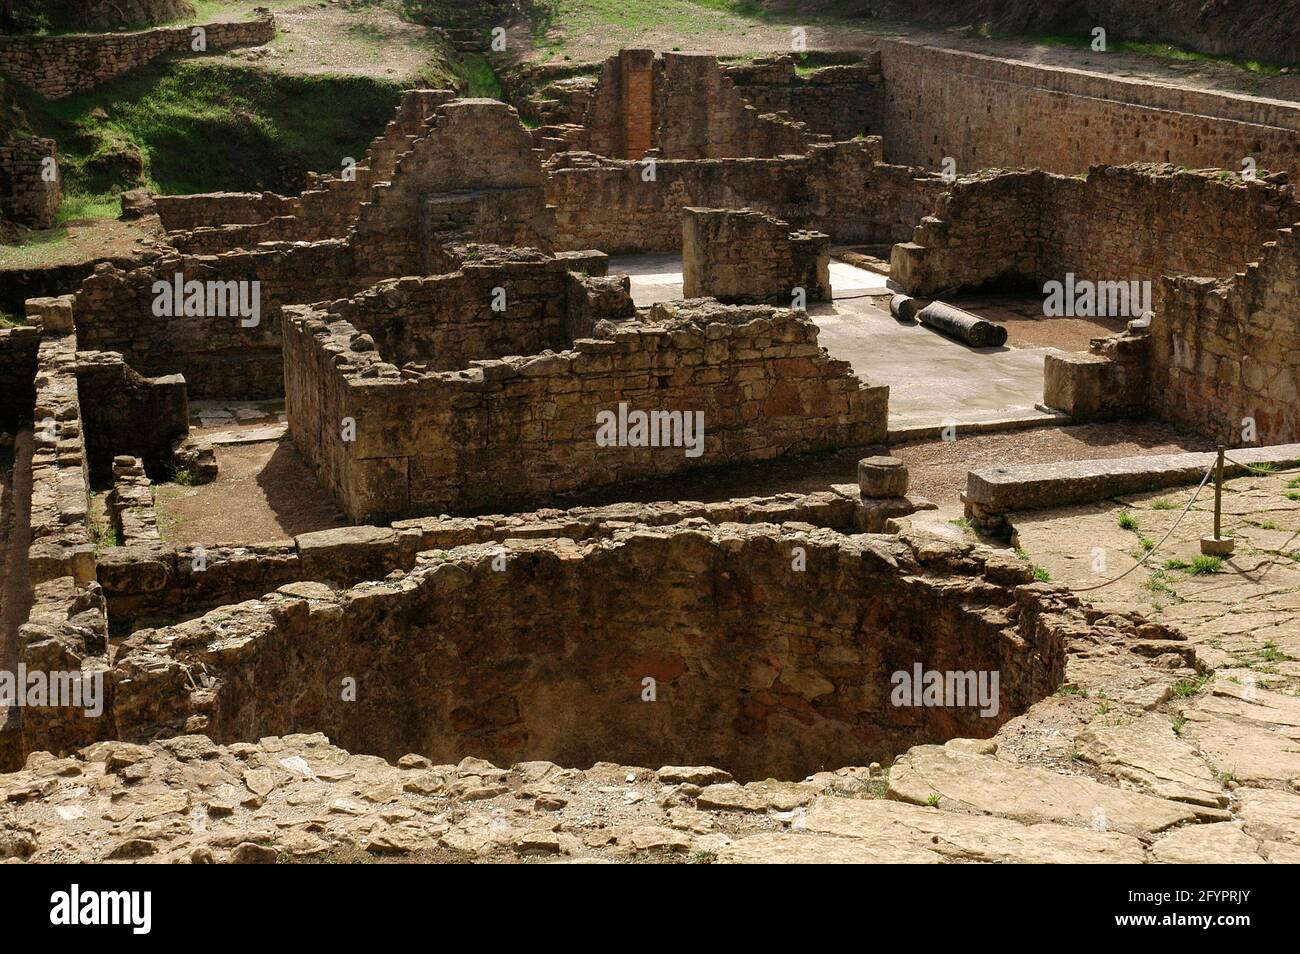 Portugal. Roman ruins of Miróbriga. Ancient Lusitanian settlement whose present-day ruins are dated to the Roman period, between the 1st and 4th centuries. East Baths, 2nd to 4th centuries. Surrounding area of Santiago do Cacém. Alentejo Region. Stock Photo